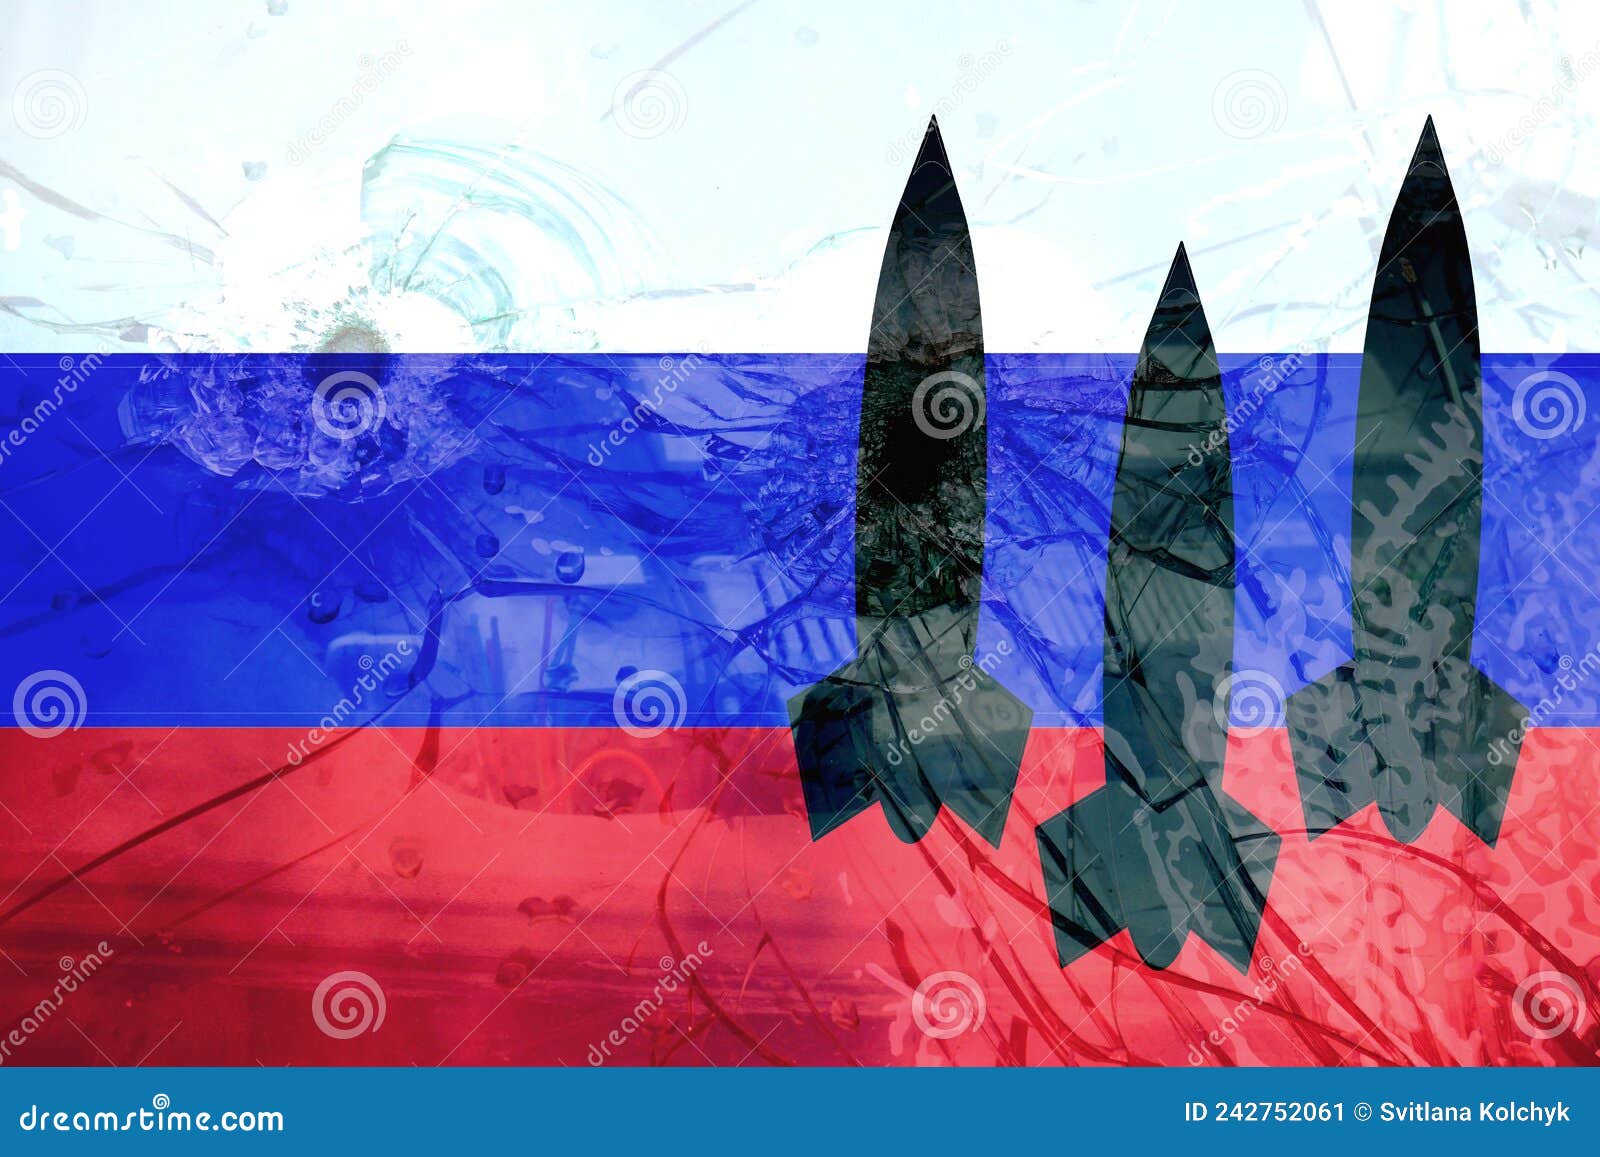 silhouette of missiles on a background of the flag of russia. nuclear weapon  danger concept